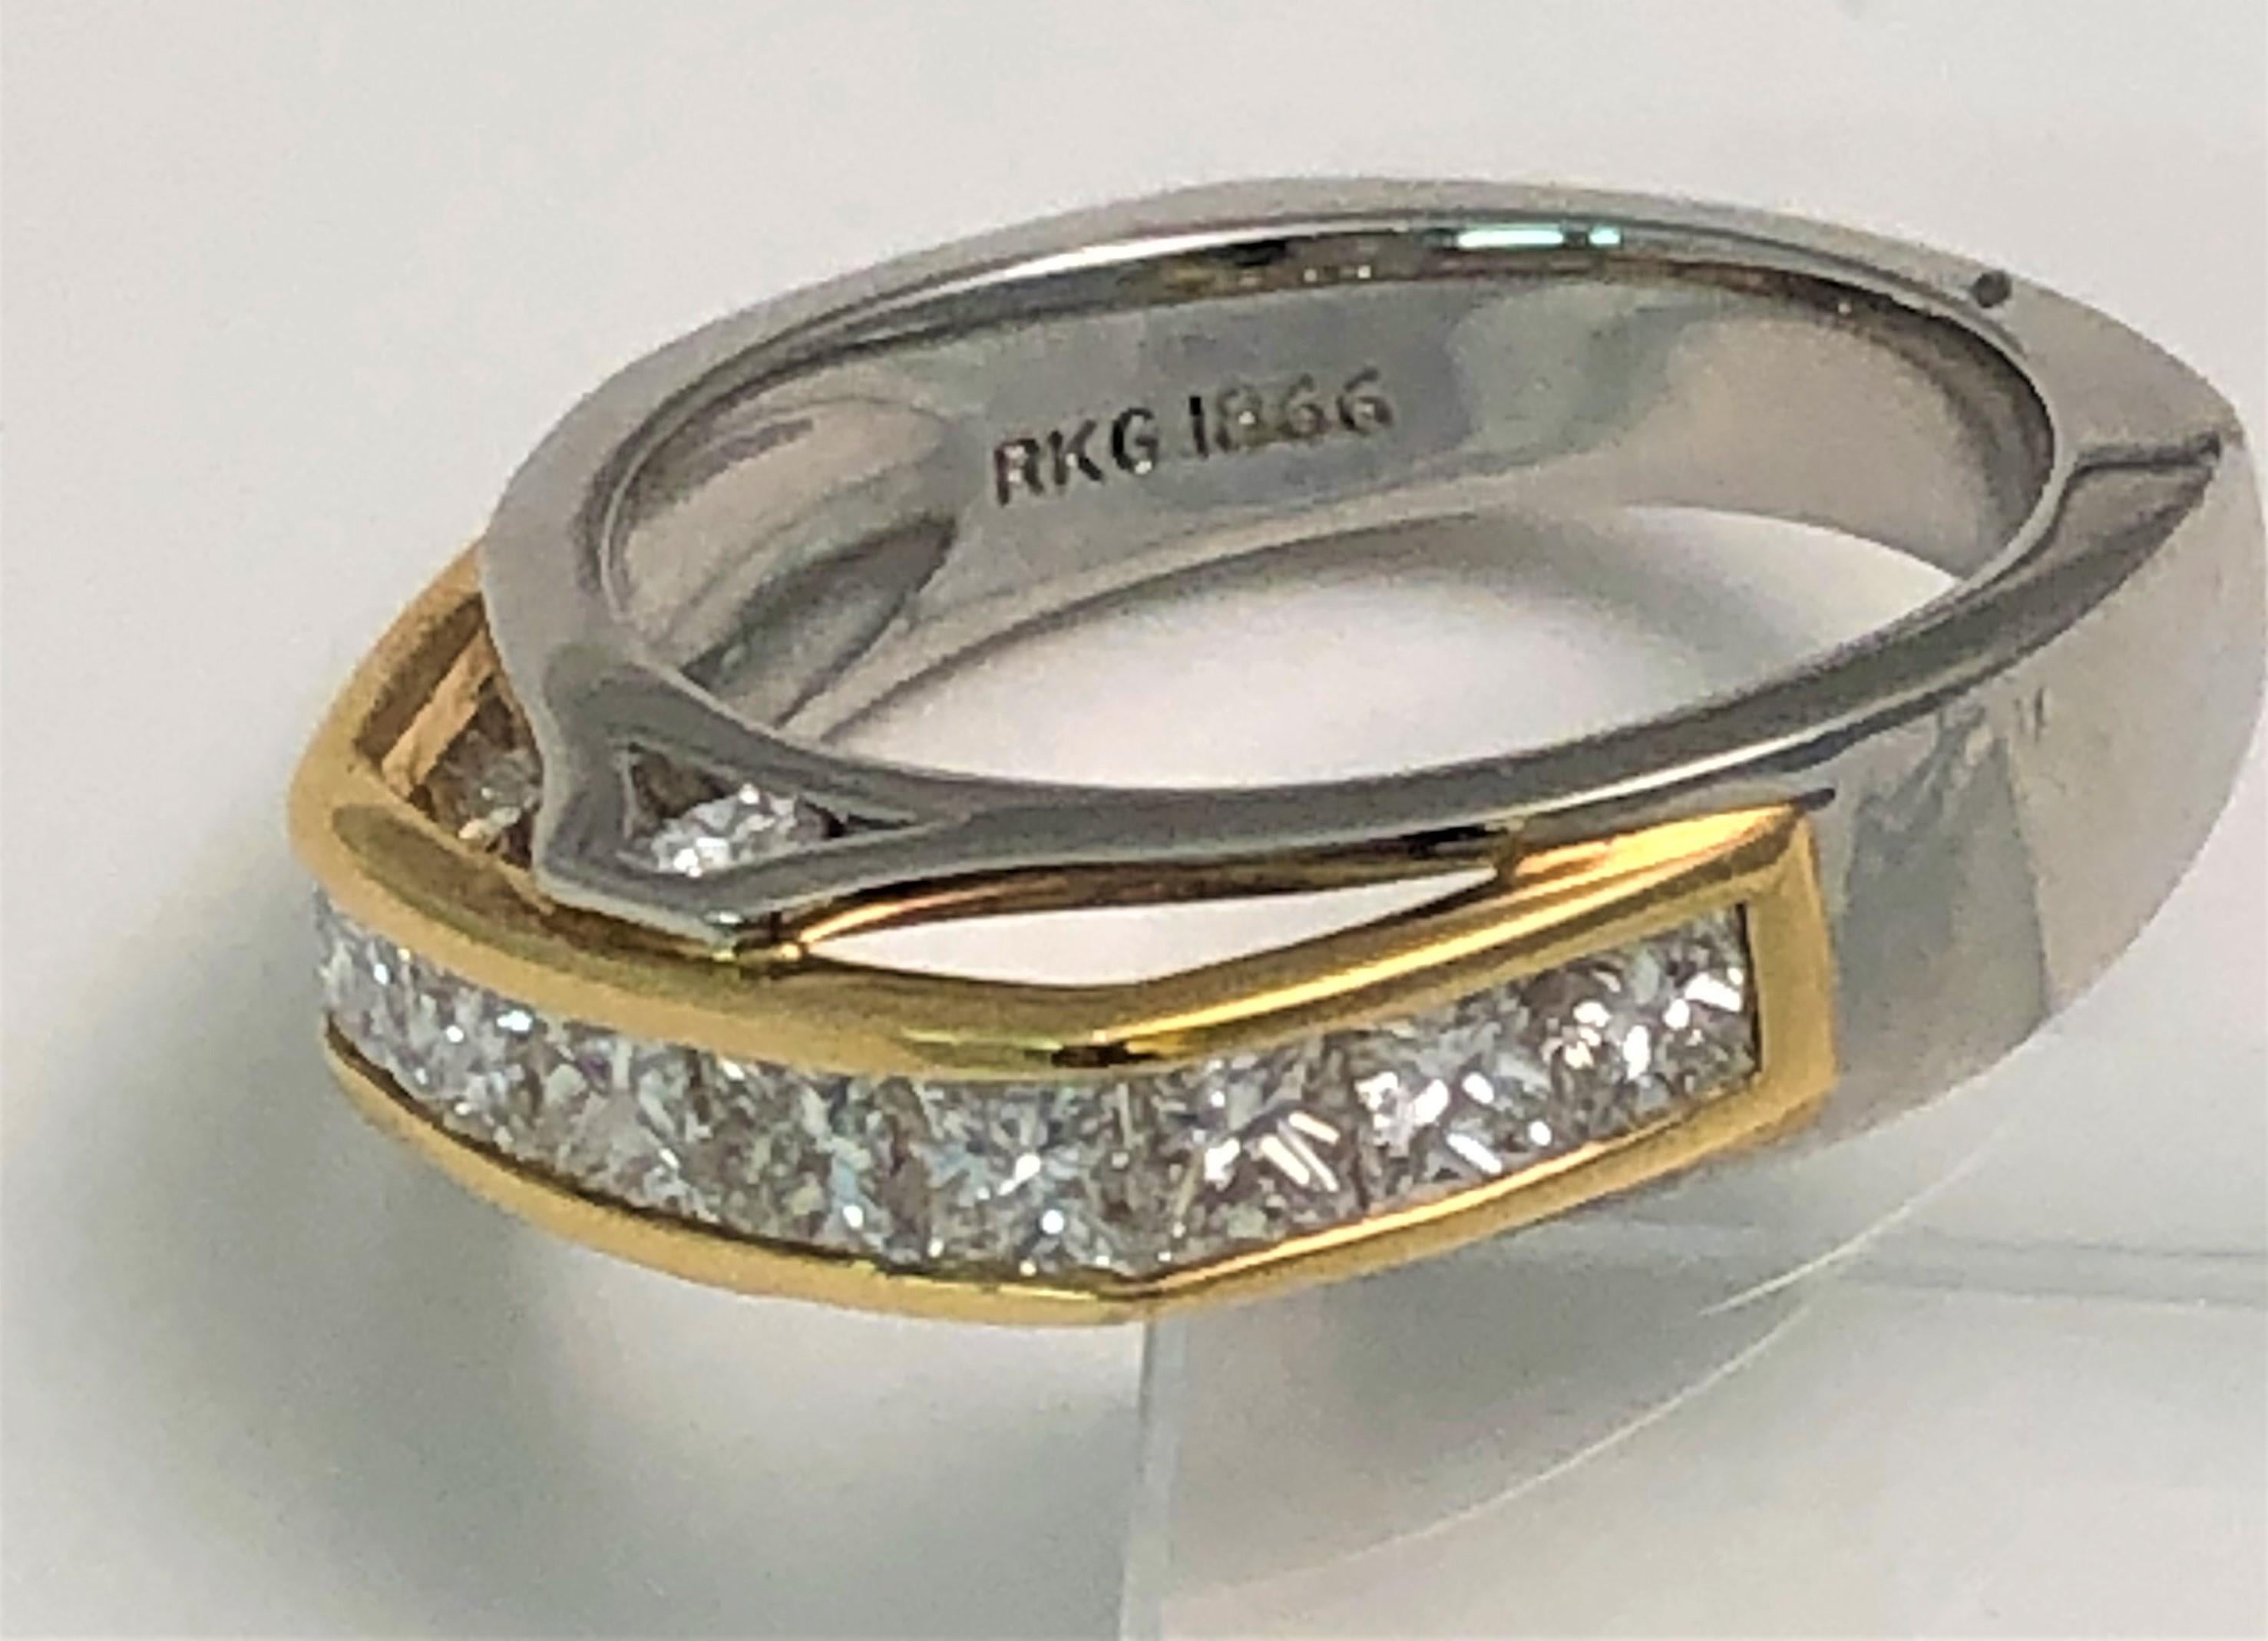 By designer Richard Krementz, this diamond ring is true to his design style!
18 karat yellow gold and platinum 'bridge' design.
Can be worn alone or stacked with other rings.
11 princess cut diamonds across top of ring, channel set.  Each